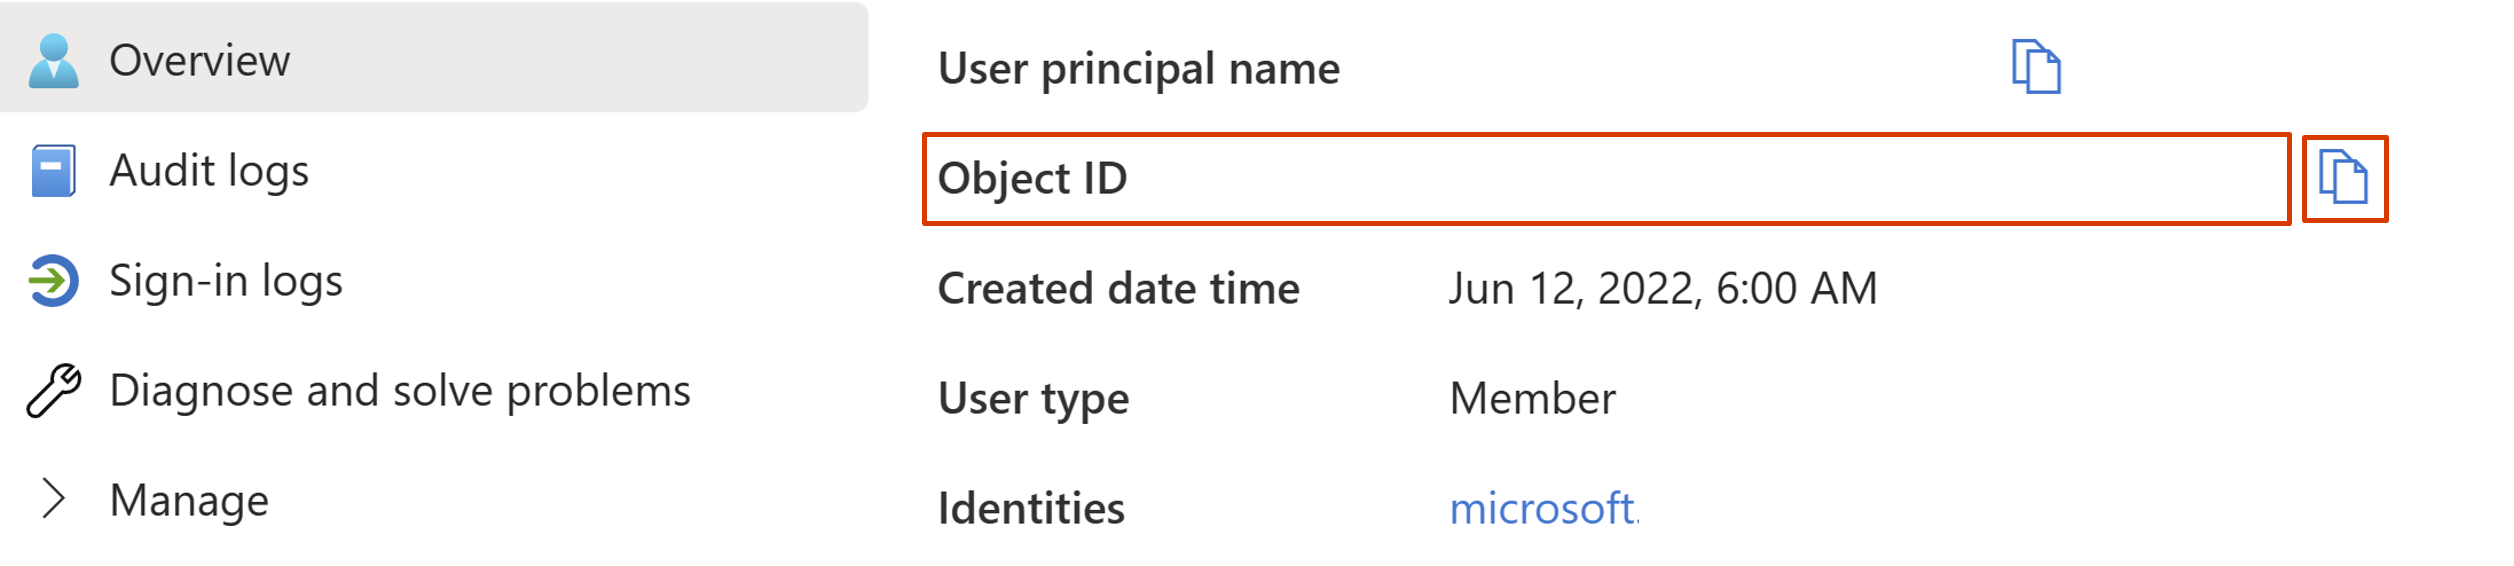 Screenshot showing how to view object ID.